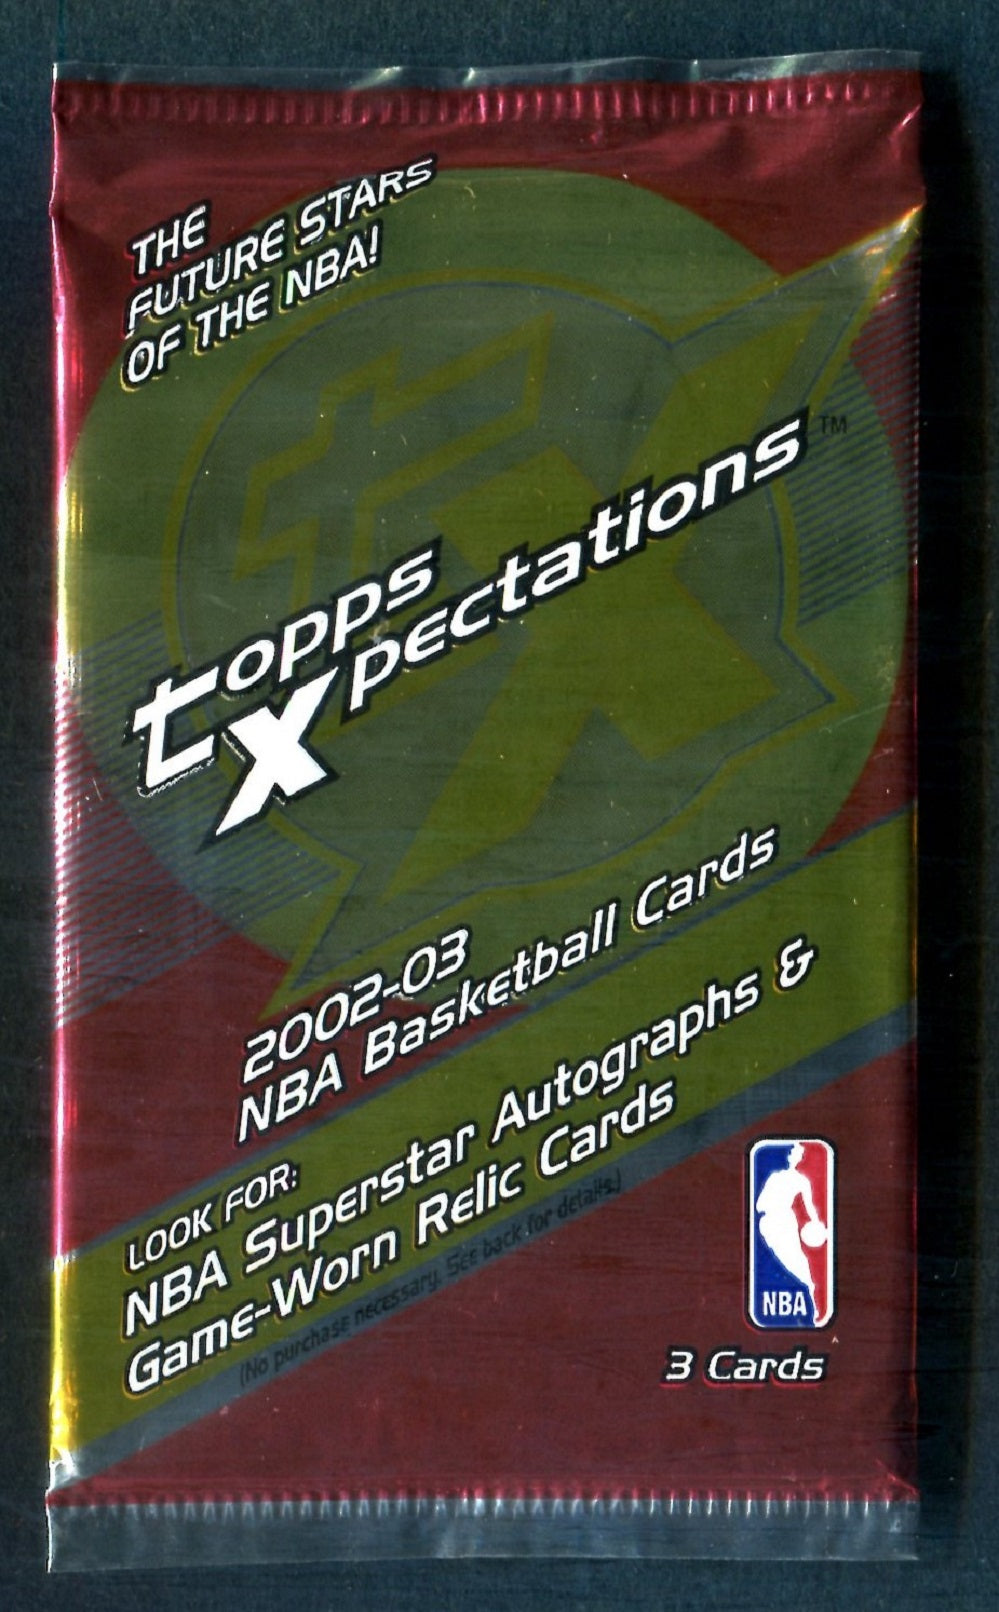 2002/03 Topps Xpectations Basketball Unopened Pack (3)